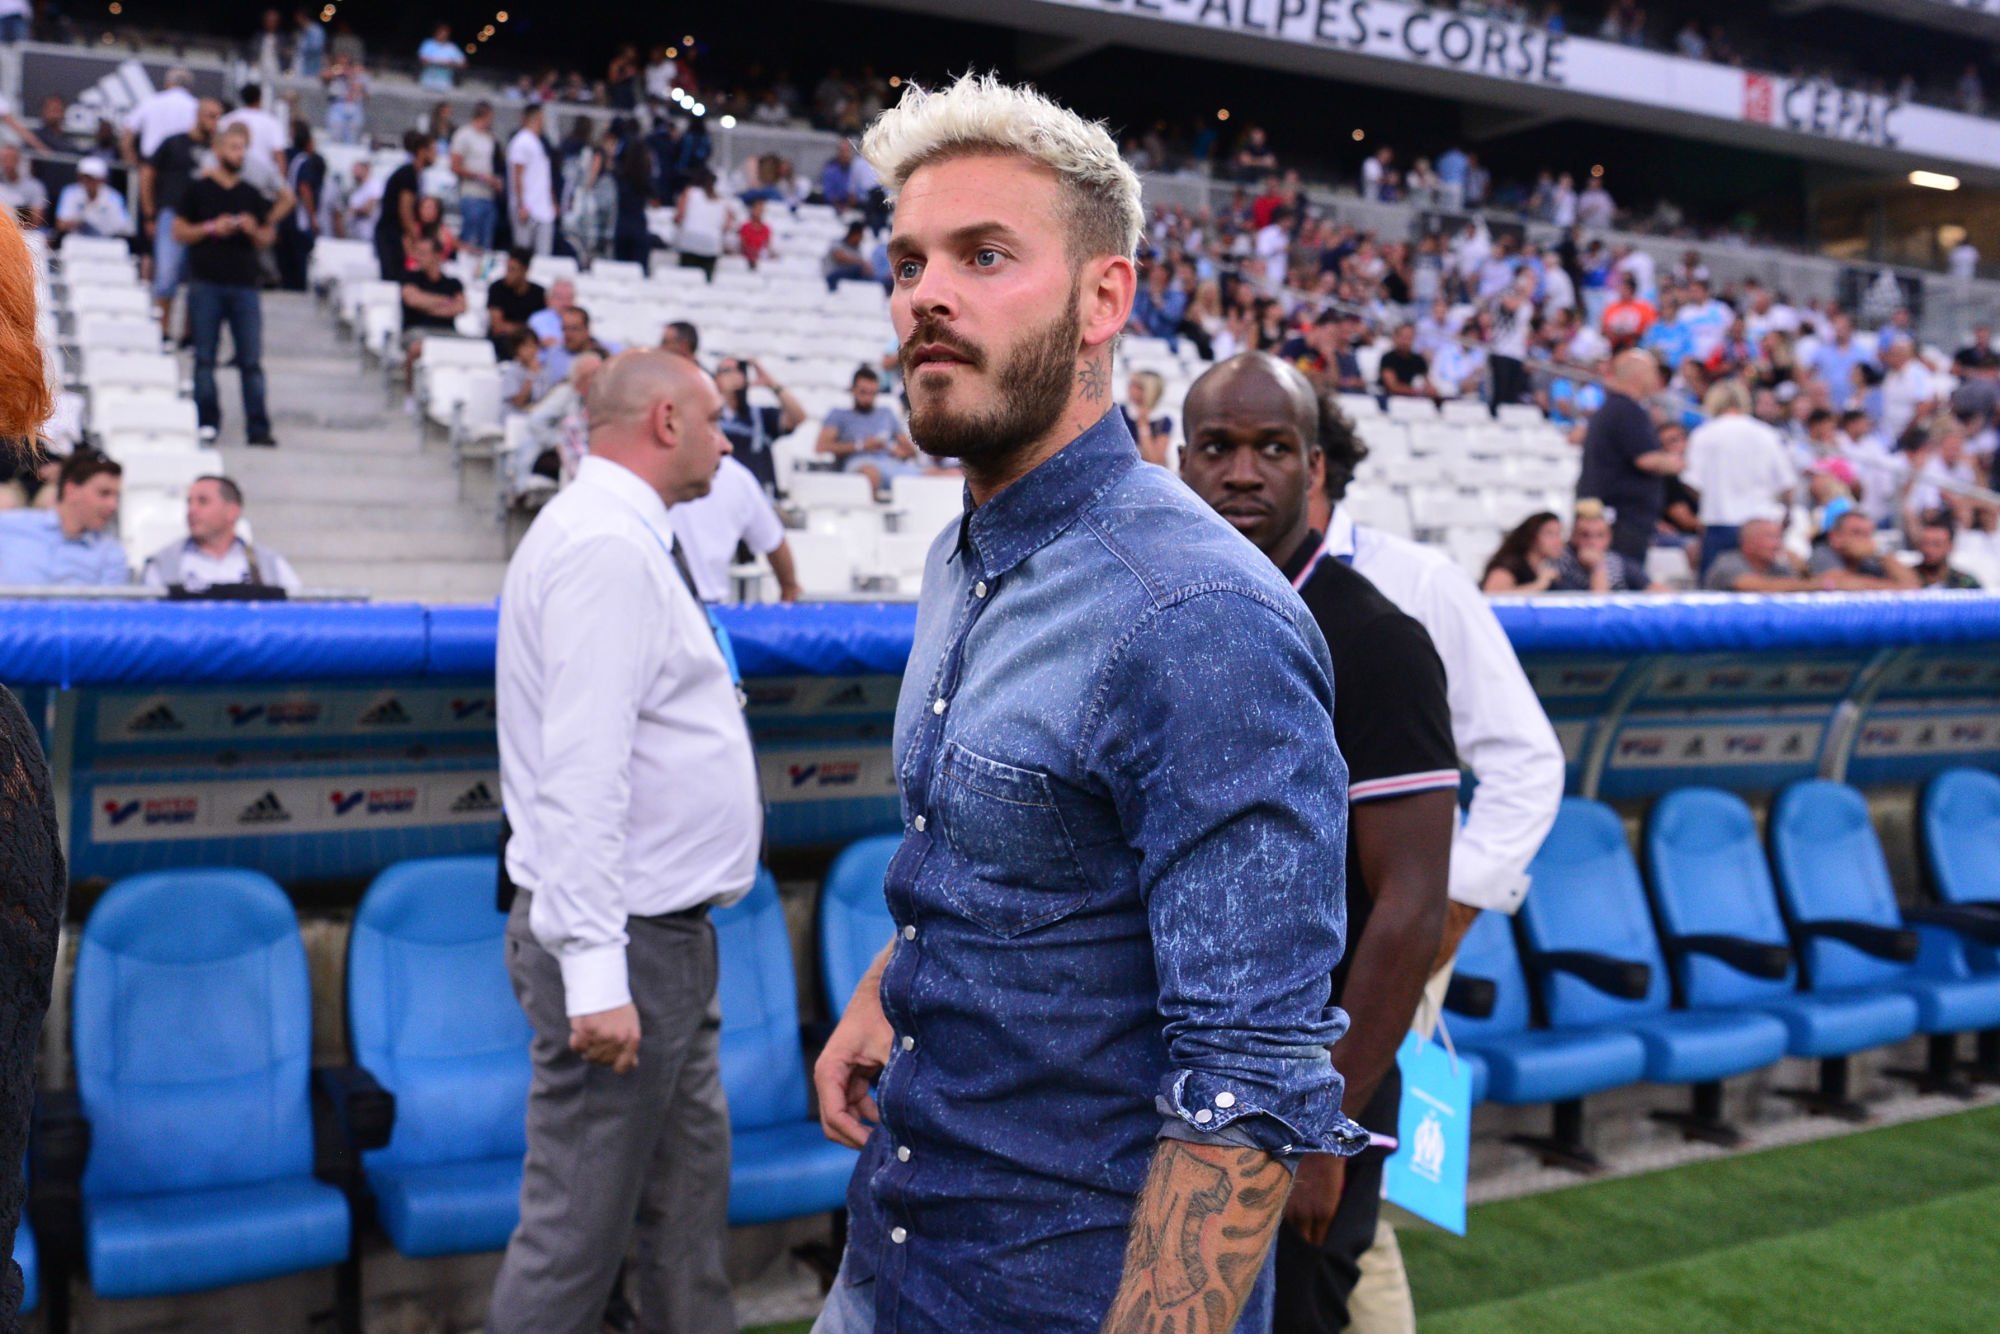 Singer Matt Pokora during the football Ligue 1 match between Olympique de Marseille and Toulouse FC at Stade Velodrome on August 14, 2016 in Marseille, France. (Photo by Dave Winter/Icon Sport)